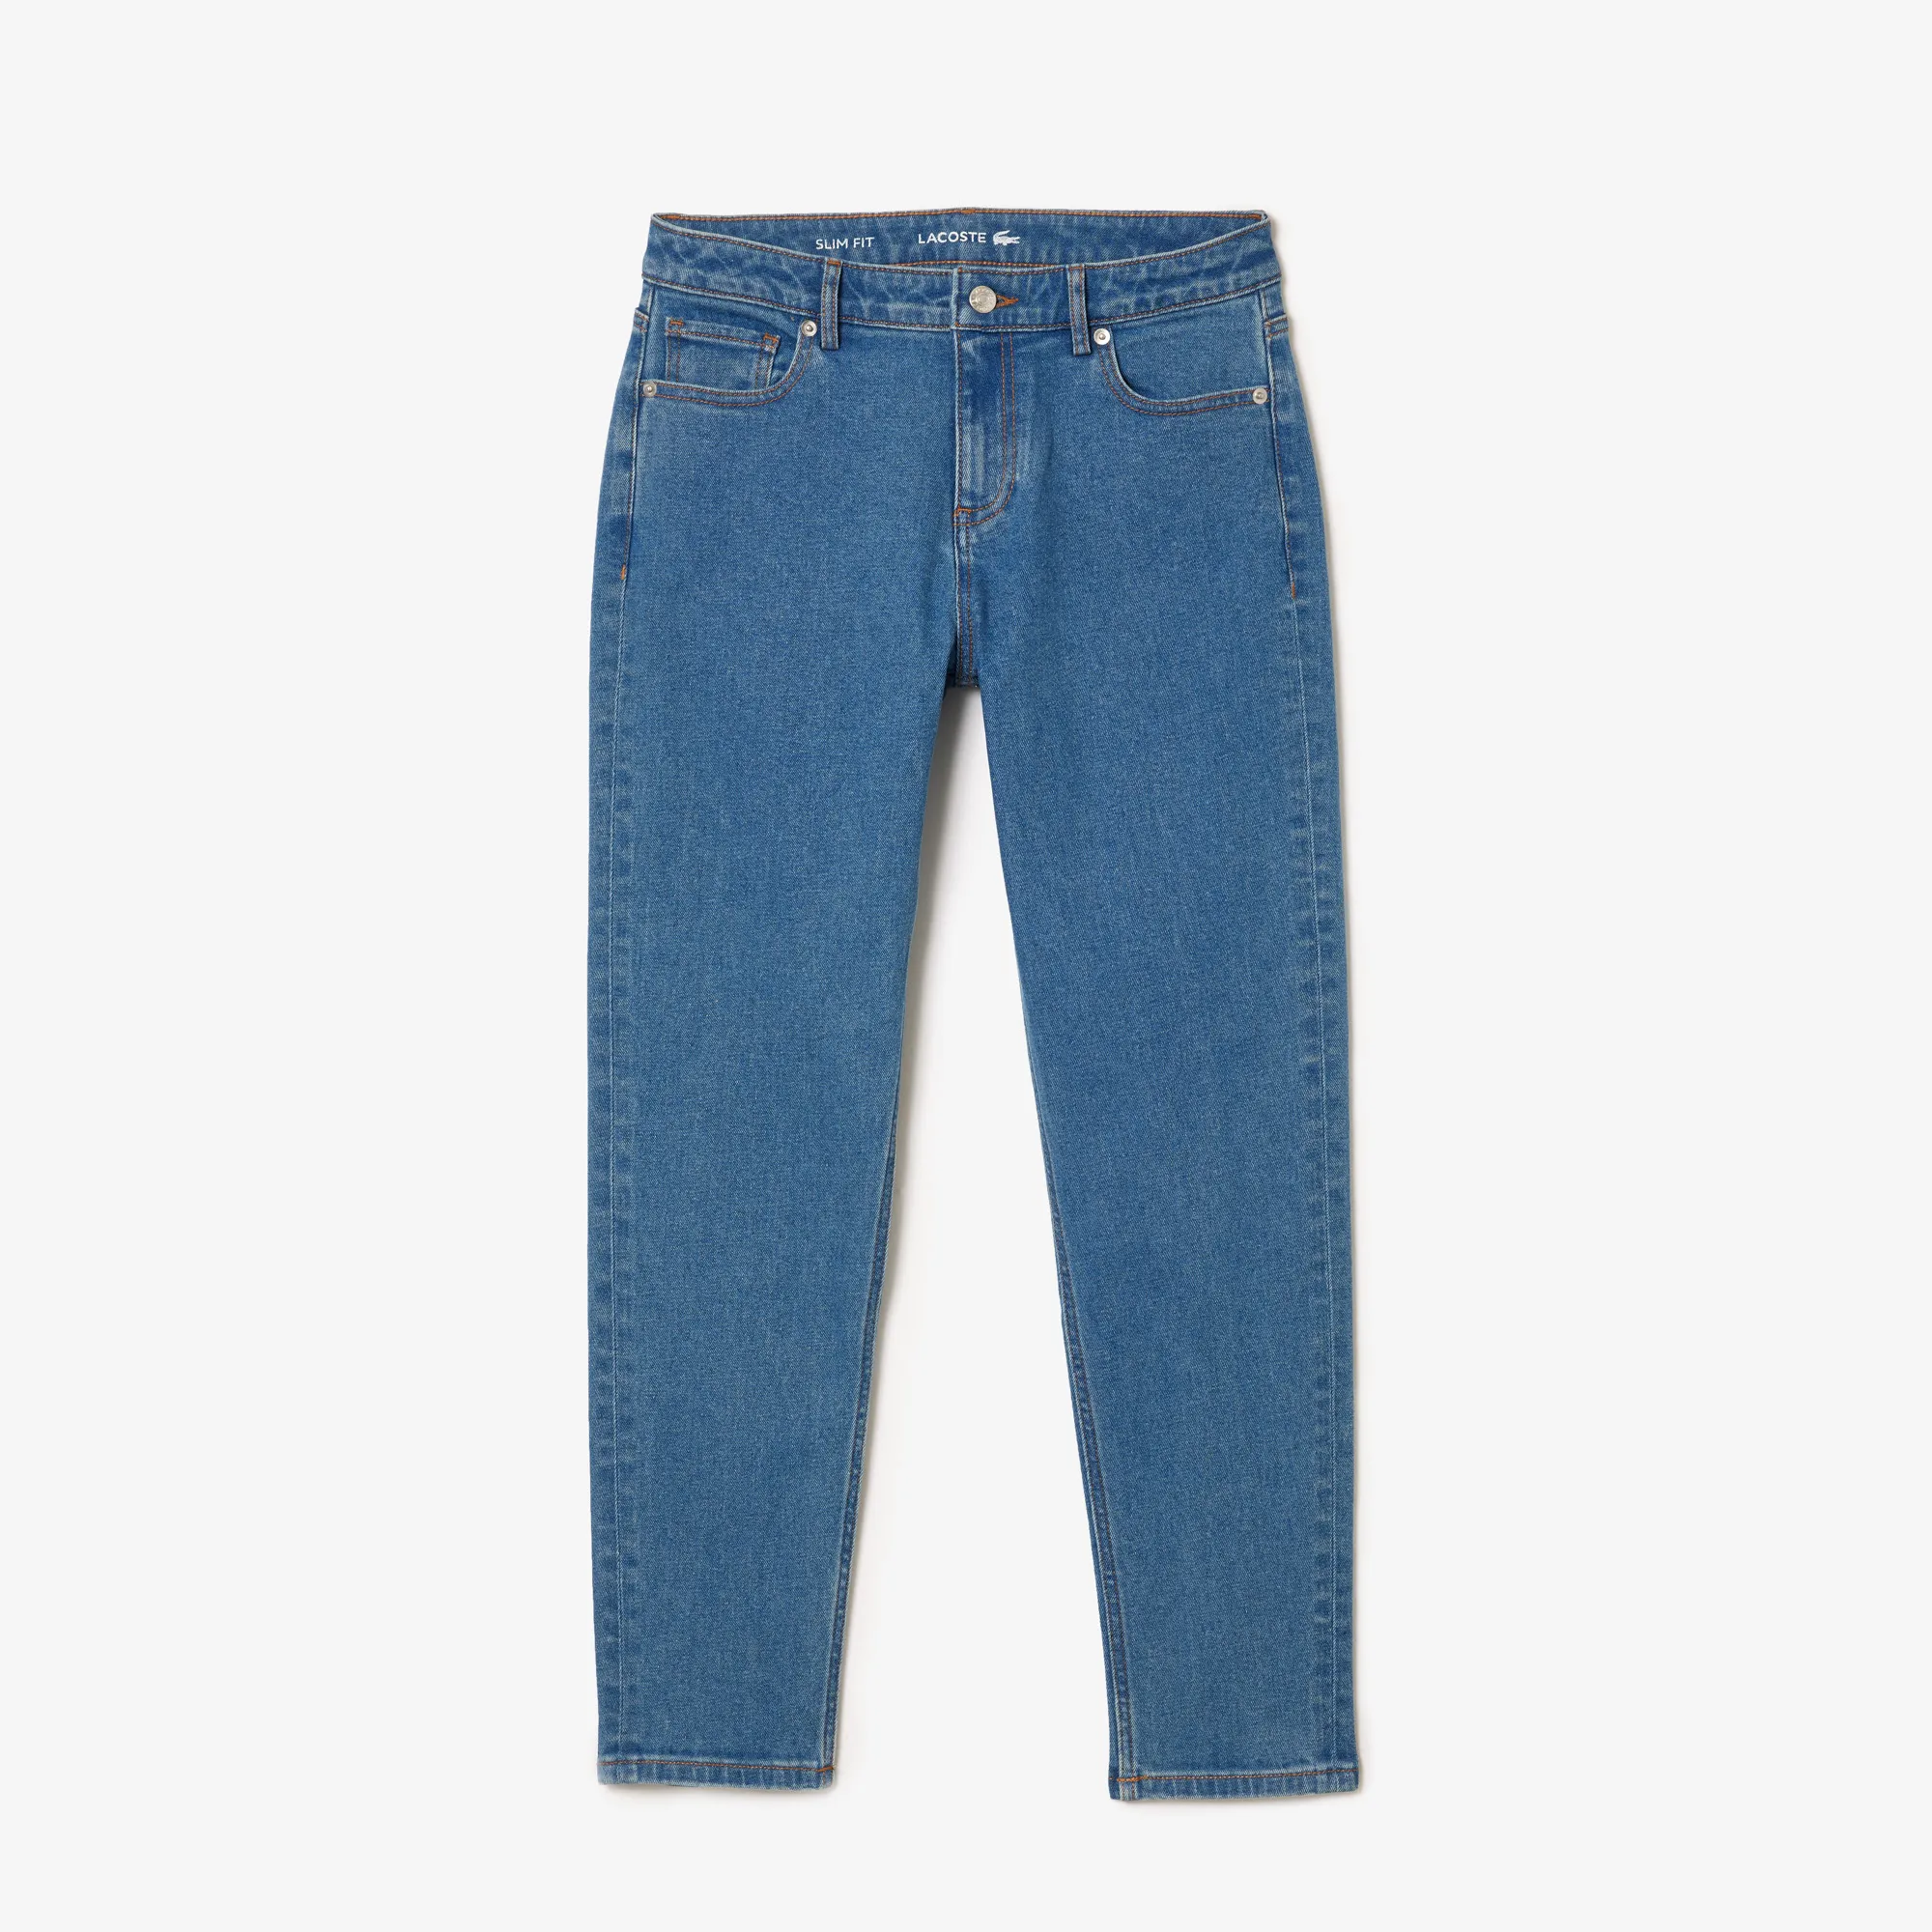 Women’s Lacoste High-Waisted Stretch Denim Jeans